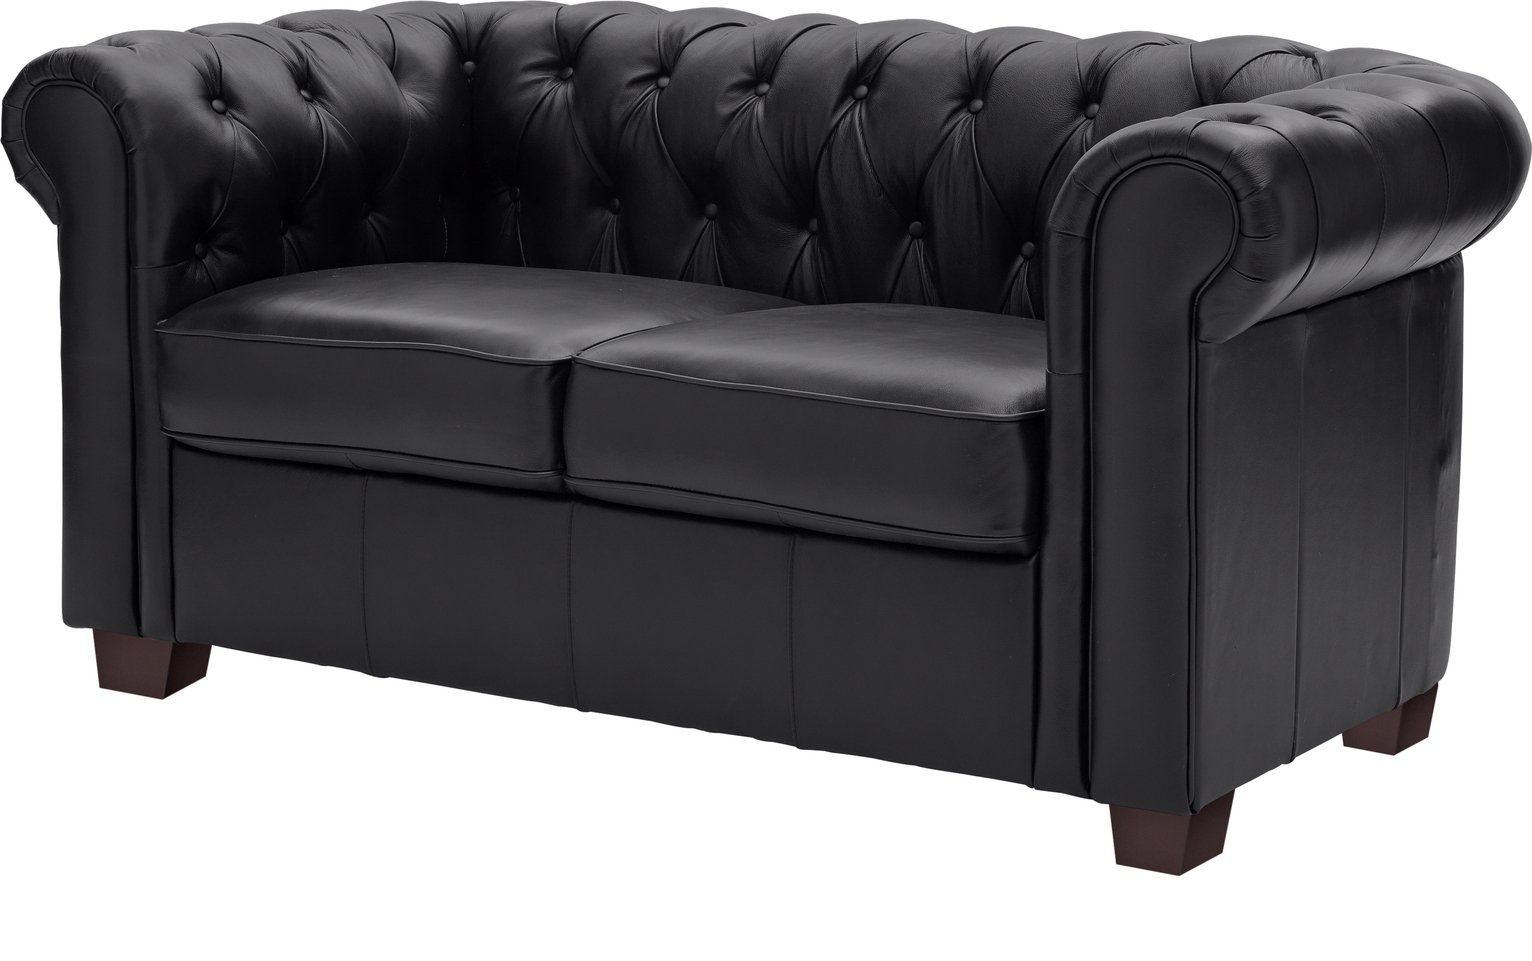 Argos Home Chesterfield 2 Seater Leather Sofa Review